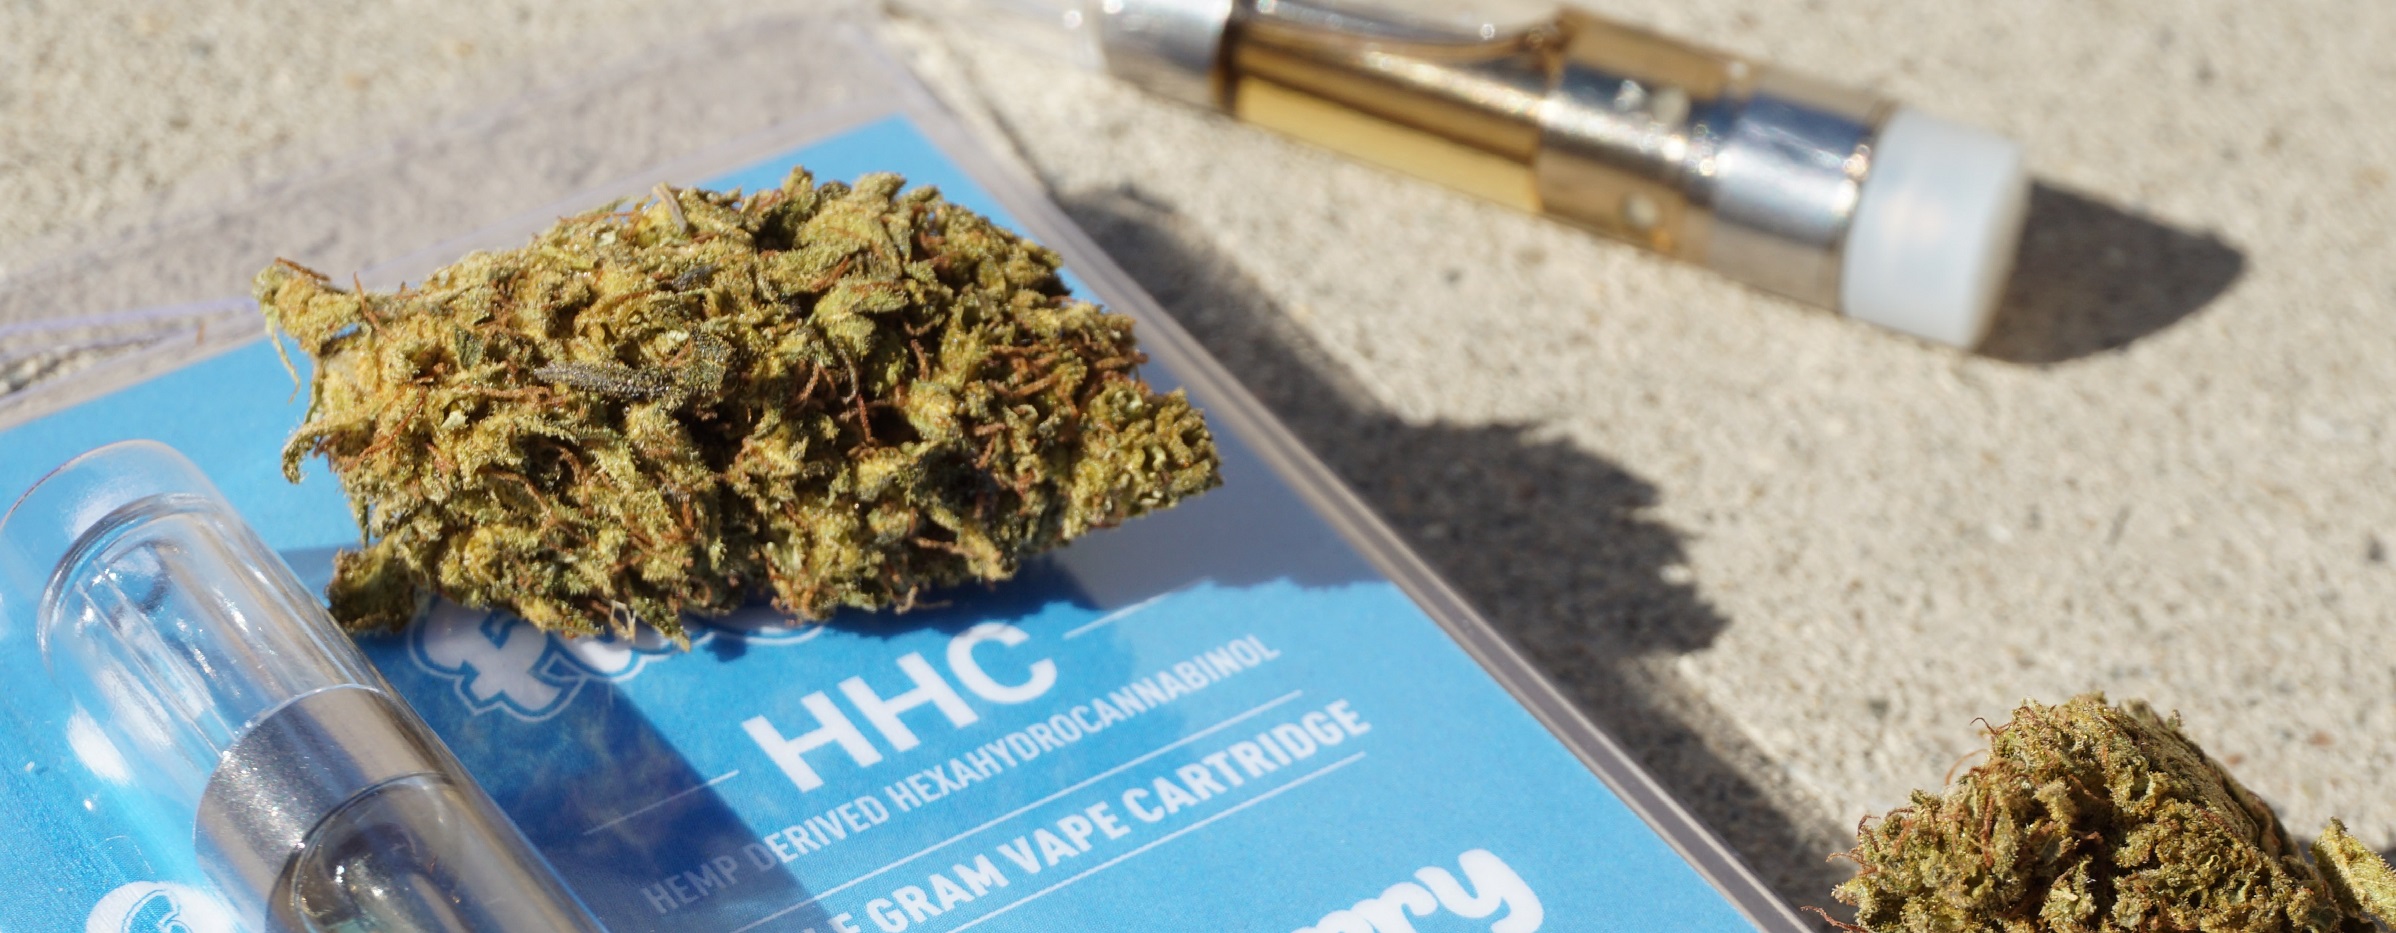 THC-O: Enhancing the Immune System Naturally